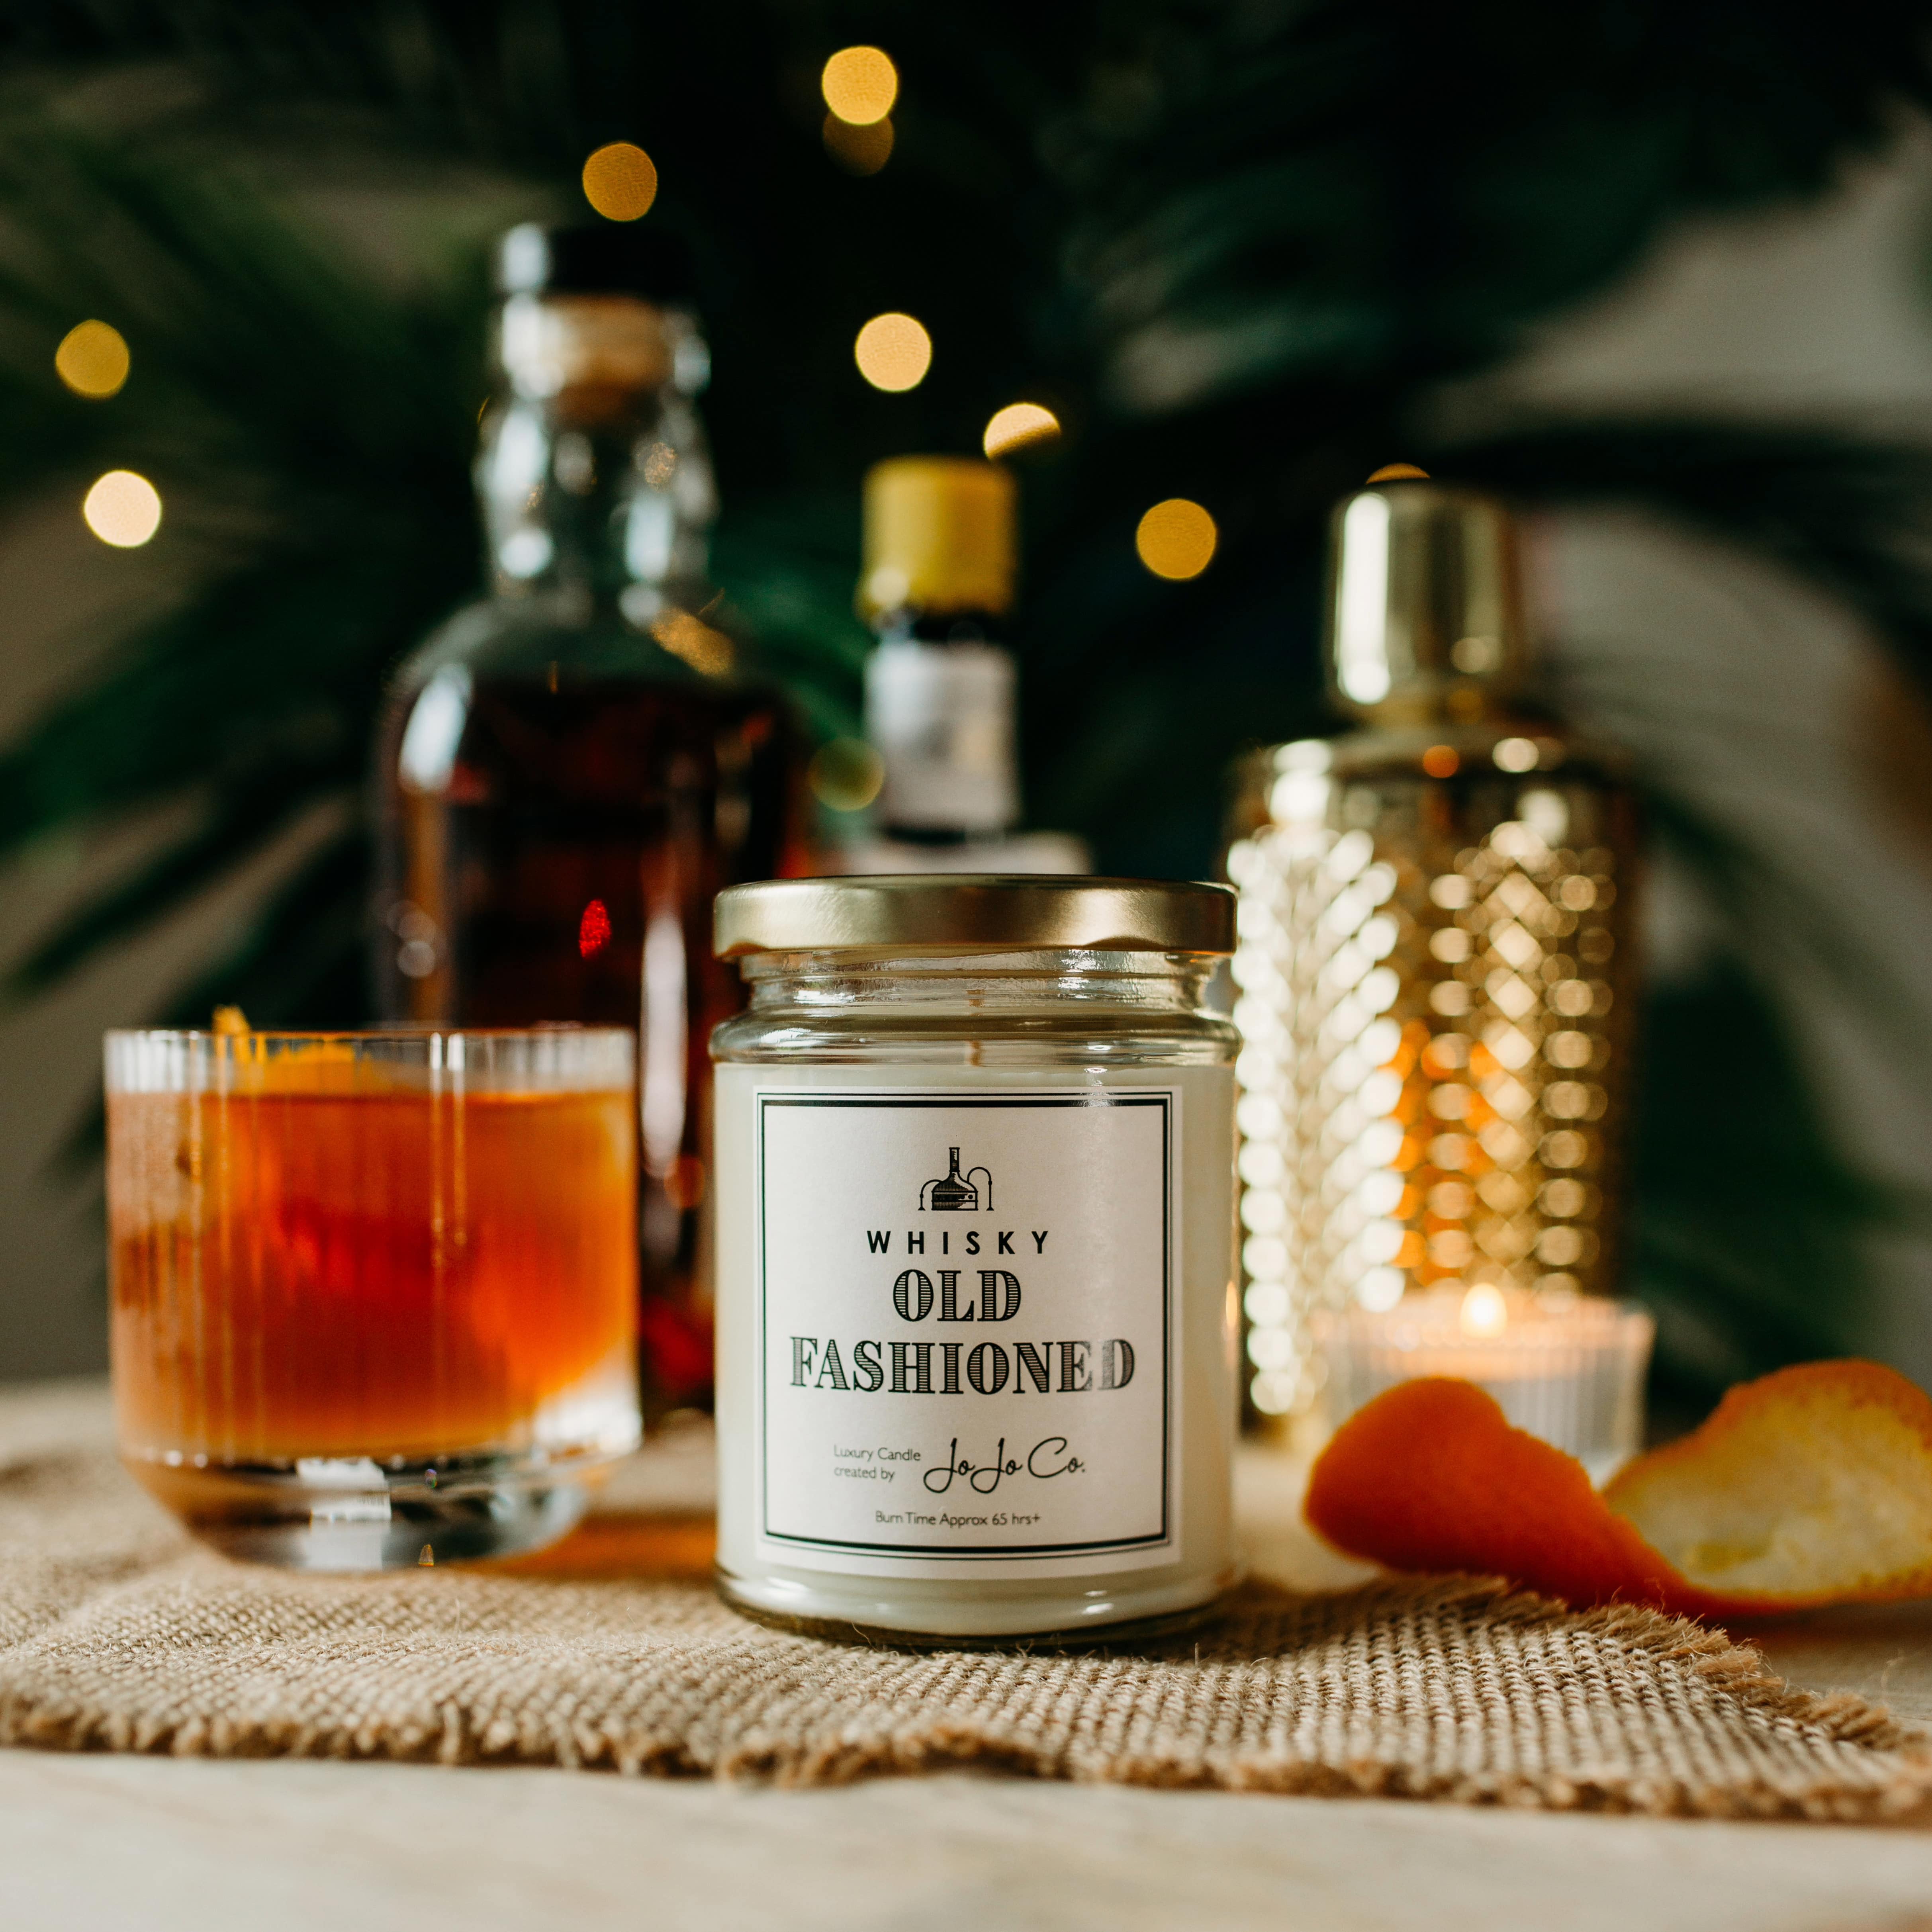 A JoJo Co. Whisky Old Fashioned candle in a glass jar with gold lid and white label sits on a bar. In the background is a large palm, bottles of spirits and a cocktail shaker. Beside the candle is some orange peel and a whisky cocktail.